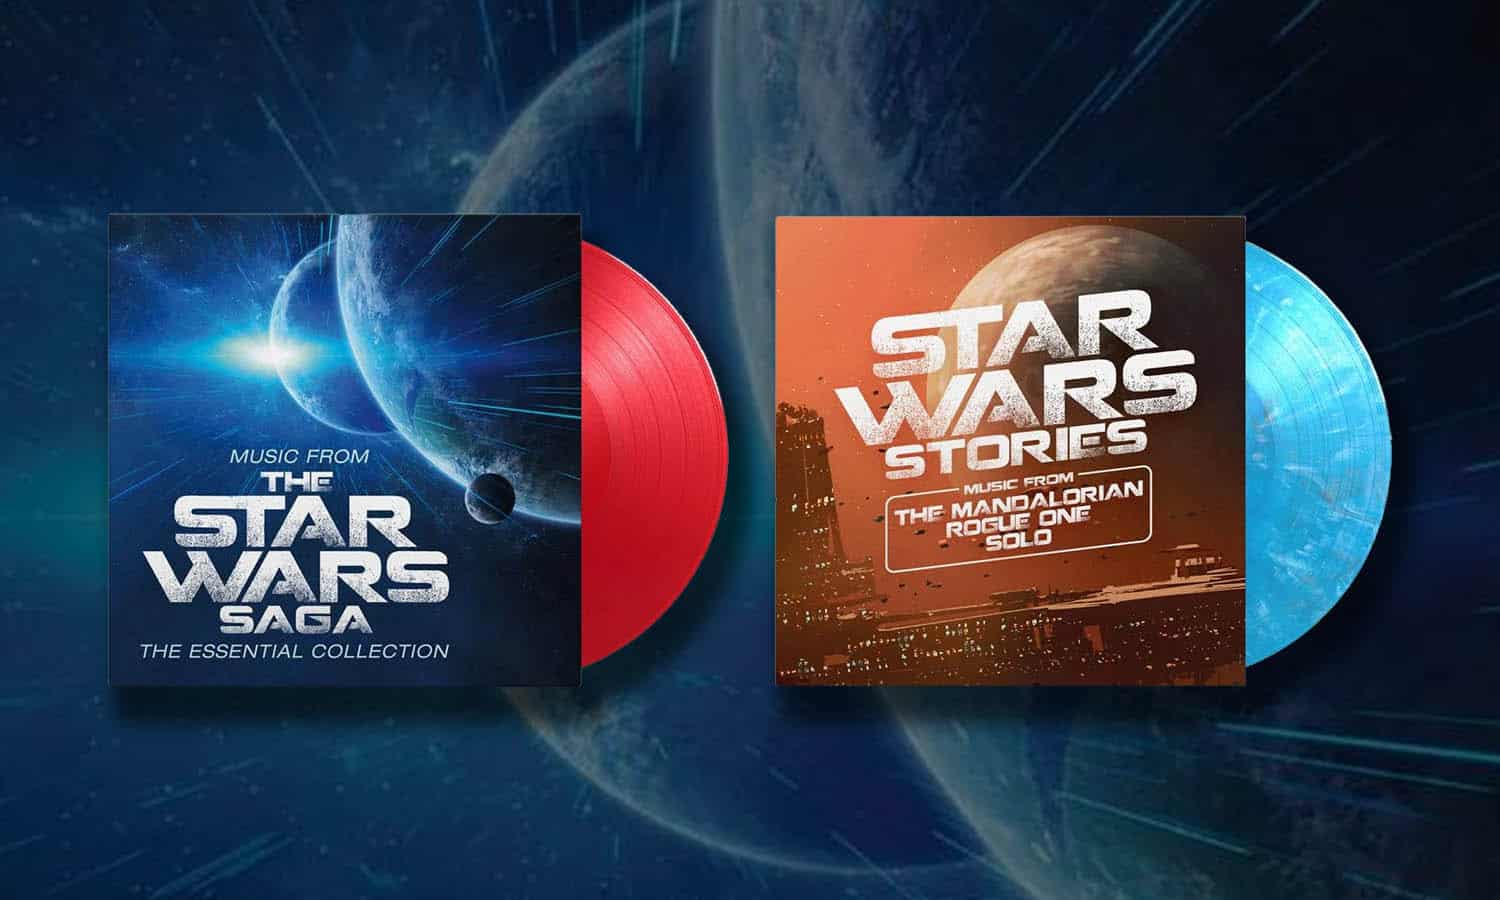 vinyles star wars music from et mandalorian solo rogue one slider